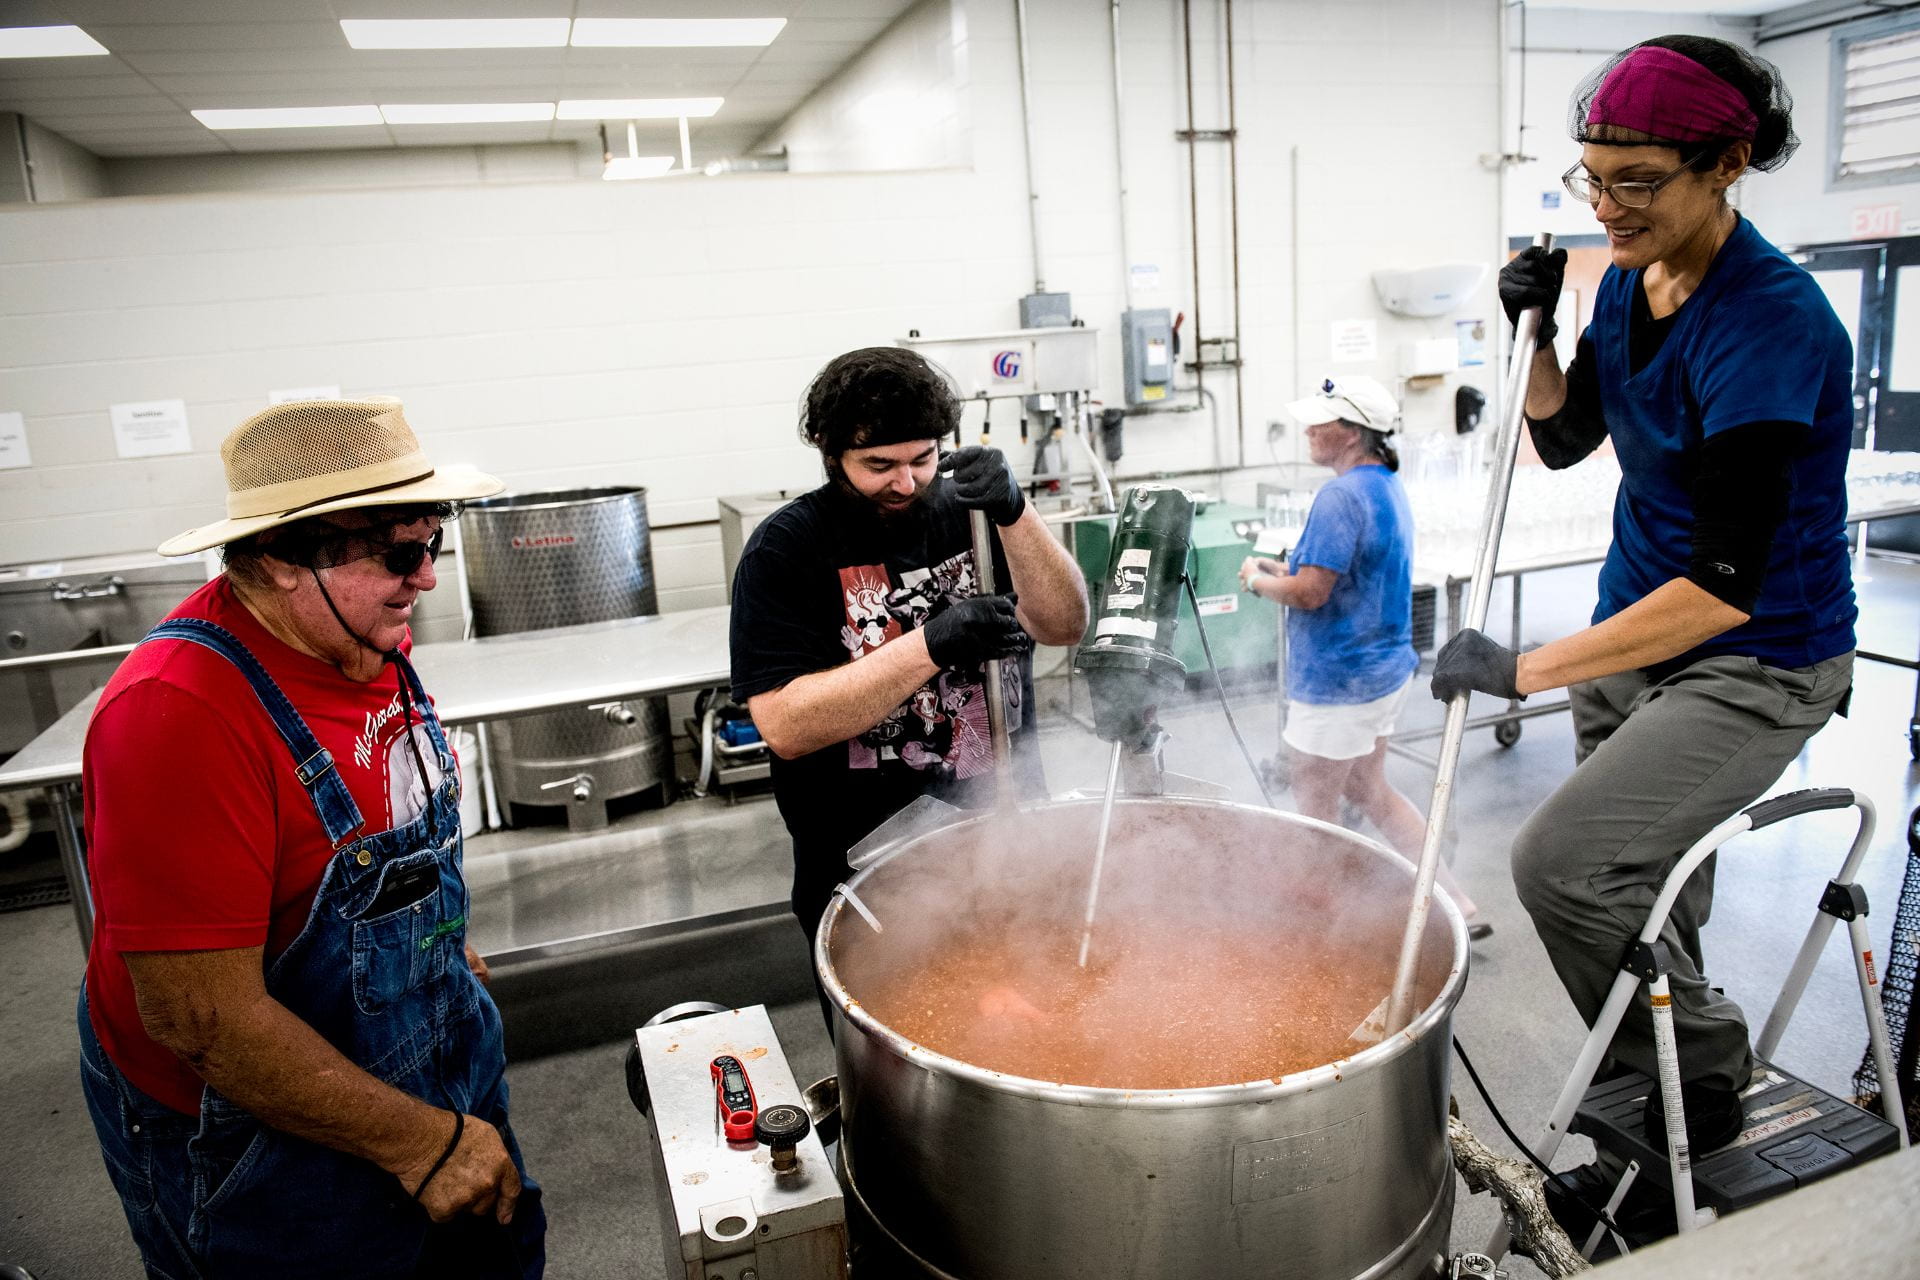 Three people stand around a large steaming kettle containing a tomato-based food.